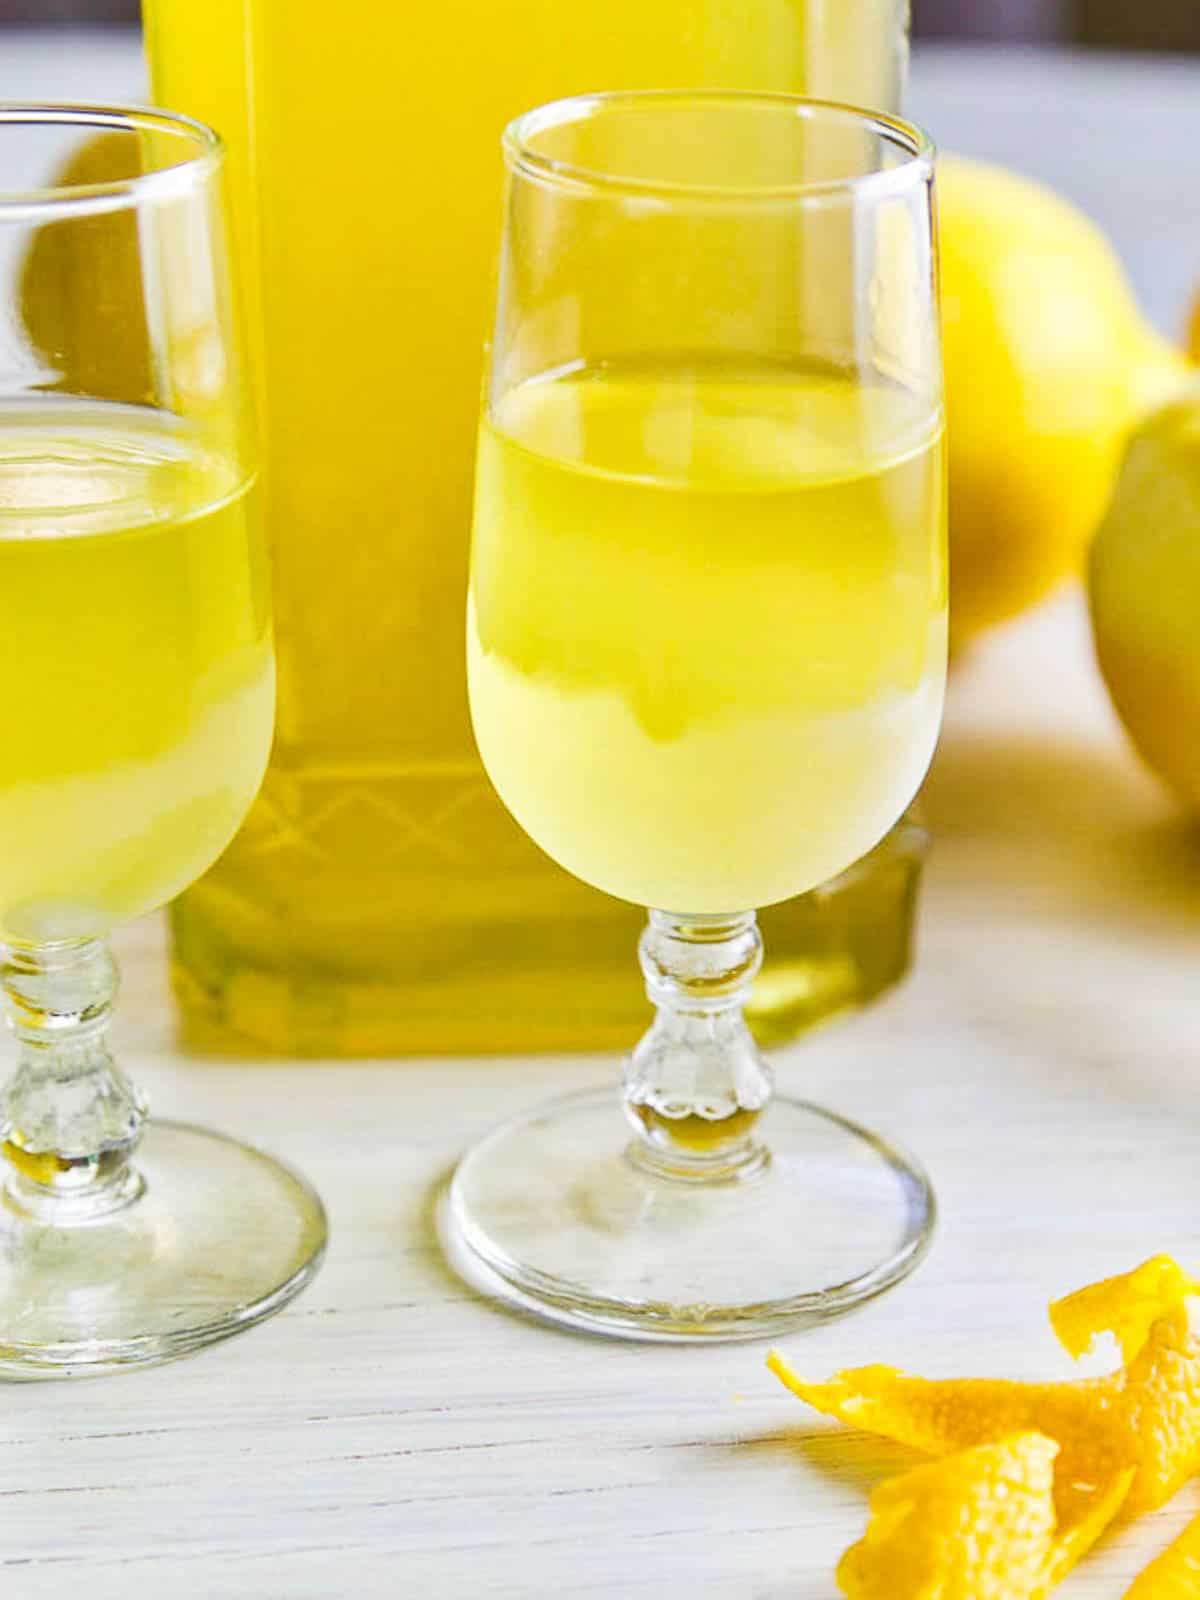 https://www.delicioustable.com/wp-content/uploads/2021/12/Icy-cold-Limoncello-in-glasses.jpg